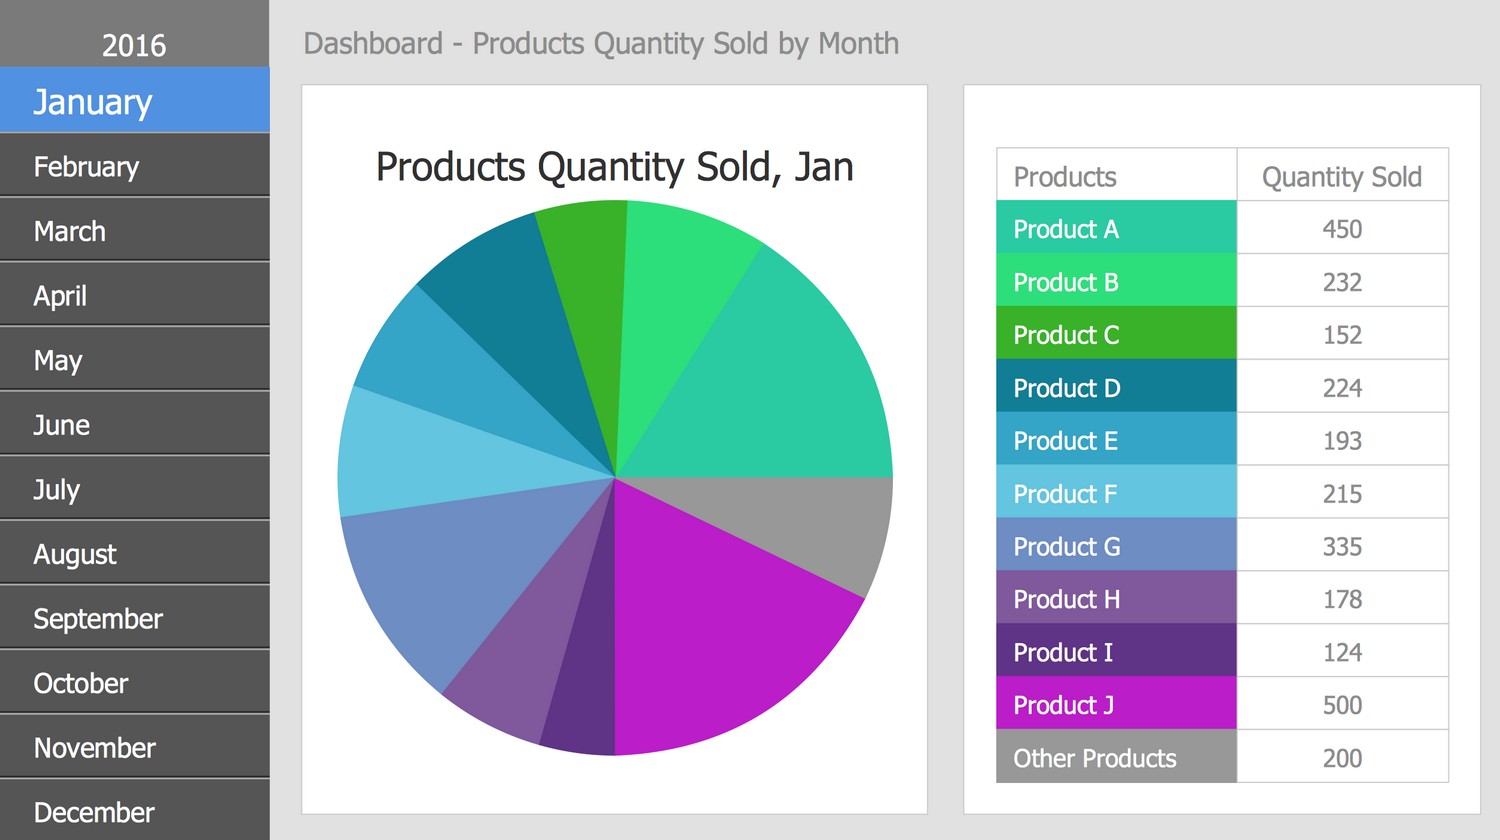 Business Intelligence Dashboard - Products Quantity Sold by Month, 2016